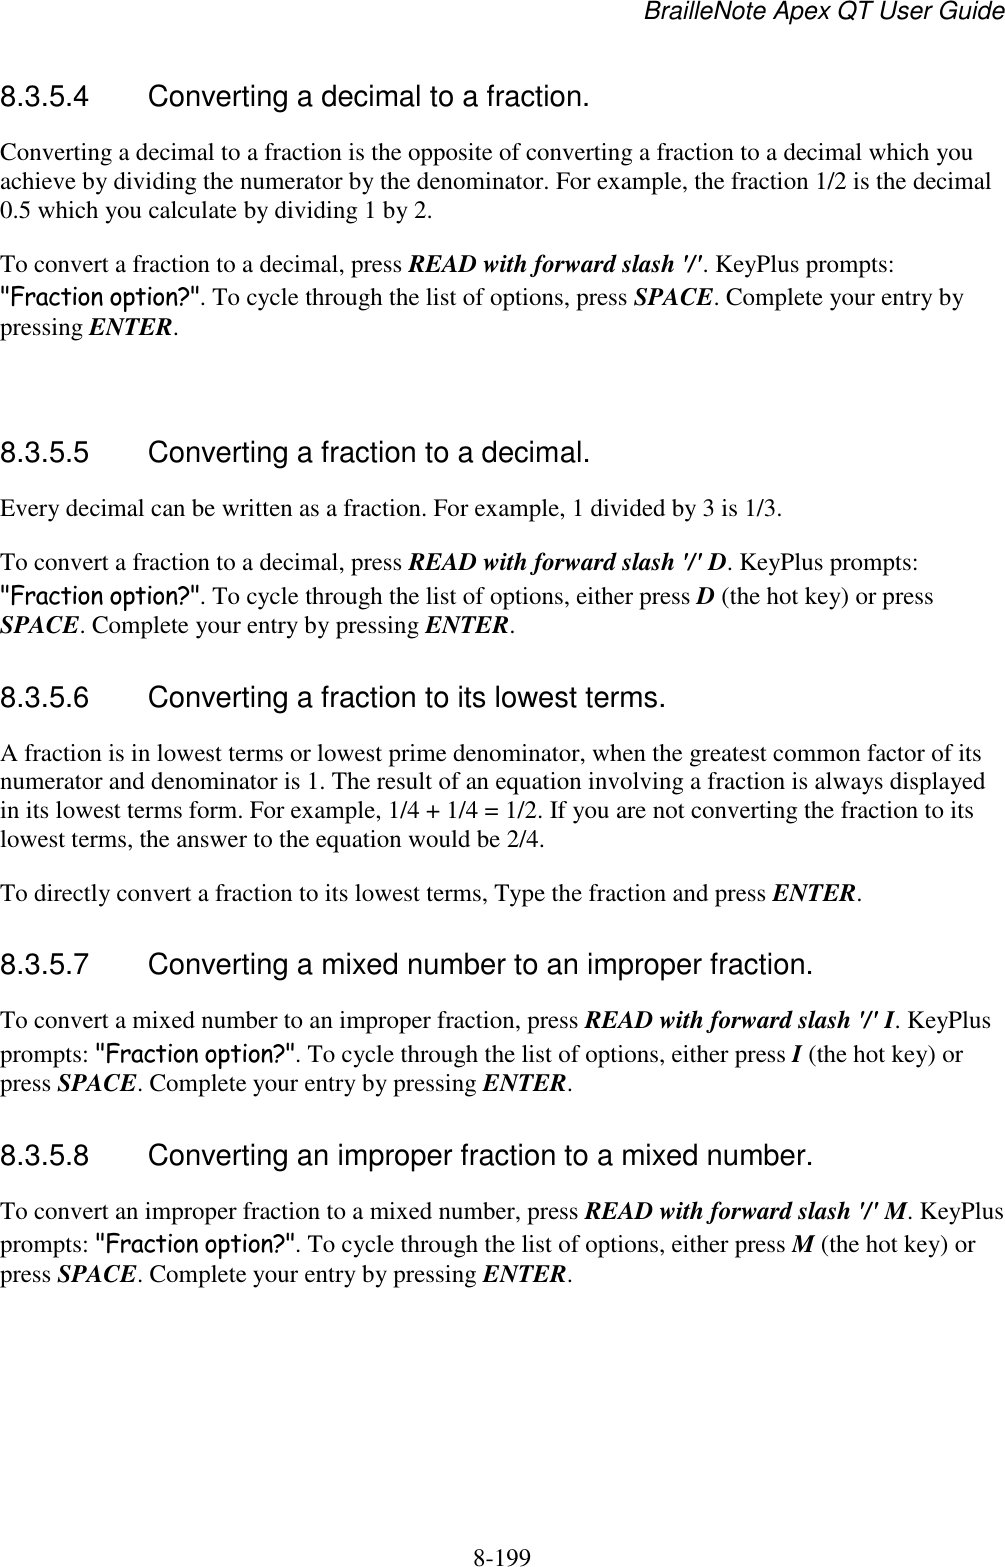 BrailleNote Apex QT User Guide  8-199   8.3.5.4  Converting a decimal to a fraction. Converting a decimal to a fraction is the opposite of converting a fraction to a decimal which you achieve by dividing the numerator by the denominator. For example, the fraction 1/2 is the decimal 0.5 which you calculate by dividing 1 by 2. To convert a fraction to a decimal, press READ with forward slash &apos;/&apos;. KeyPlus prompts: &quot;Fraction option?&quot;. To cycle through the list of options, press SPACE. Complete your entry by pressing ENTER.   8.3.5.5  Converting a fraction to a decimal. Every decimal can be written as a fraction. For example, 1 divided by 3 is 1/3. To convert a fraction to a decimal, press READ with forward slash &apos;/&apos; D. KeyPlus prompts: &quot;Fraction option?&quot;. To cycle through the list of options, either press D (the hot key) or press SPACE. Complete your entry by pressing ENTER.  8.3.5.6  Converting a fraction to its lowest terms. A fraction is in lowest terms or lowest prime denominator, when the greatest common factor of its numerator and denominator is 1. The result of an equation involving a fraction is always displayed in its lowest terms form. For example, 1/4 + 1/4 = 1/2. If you are not converting the fraction to its lowest terms, the answer to the equation would be 2/4. To directly convert a fraction to its lowest terms, Type the fraction and press ENTER.  8.3.5.7  Converting a mixed number to an improper fraction. To convert a mixed number to an improper fraction, press READ with forward slash &apos;/&apos; I. KeyPlus prompts: &quot;Fraction option?&quot;. To cycle through the list of options, either press I (the hot key) or press SPACE. Complete your entry by pressing ENTER.  8.3.5.8  Converting an improper fraction to a mixed number. To convert an improper fraction to a mixed number, press READ with forward slash &apos;/&apos; M. KeyPlus prompts: &quot;Fraction option?&quot;. To cycle through the list of options, either press M (the hot key) or press SPACE. Complete your entry by pressing ENTER.  